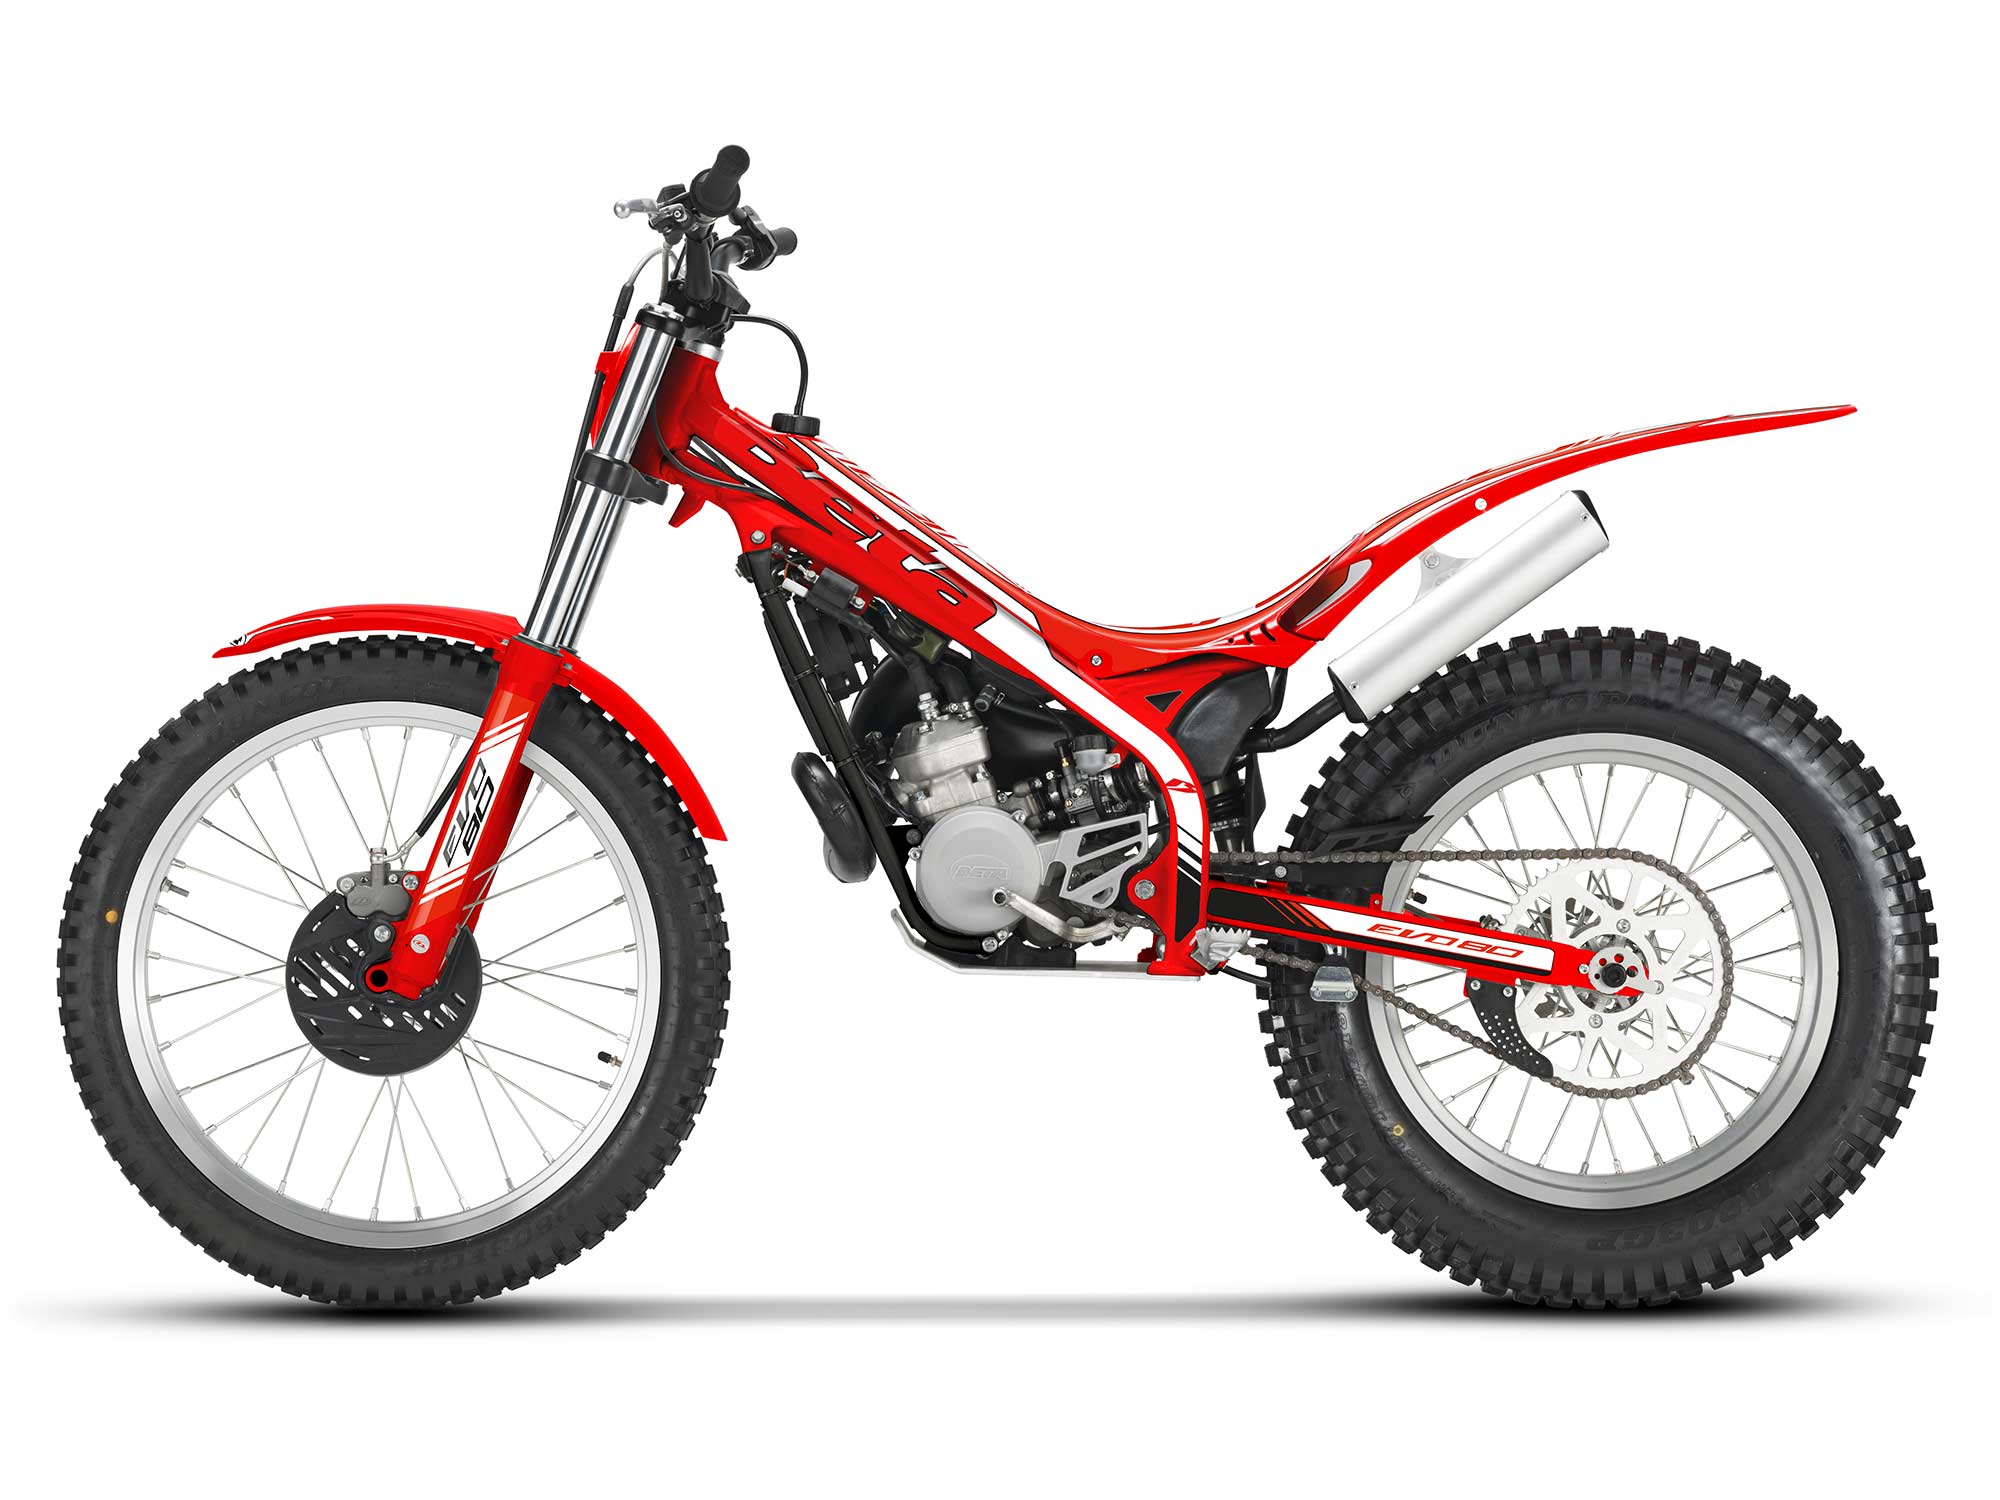 bvm-moto - First ever trials bike and what better than a Beta 80cc